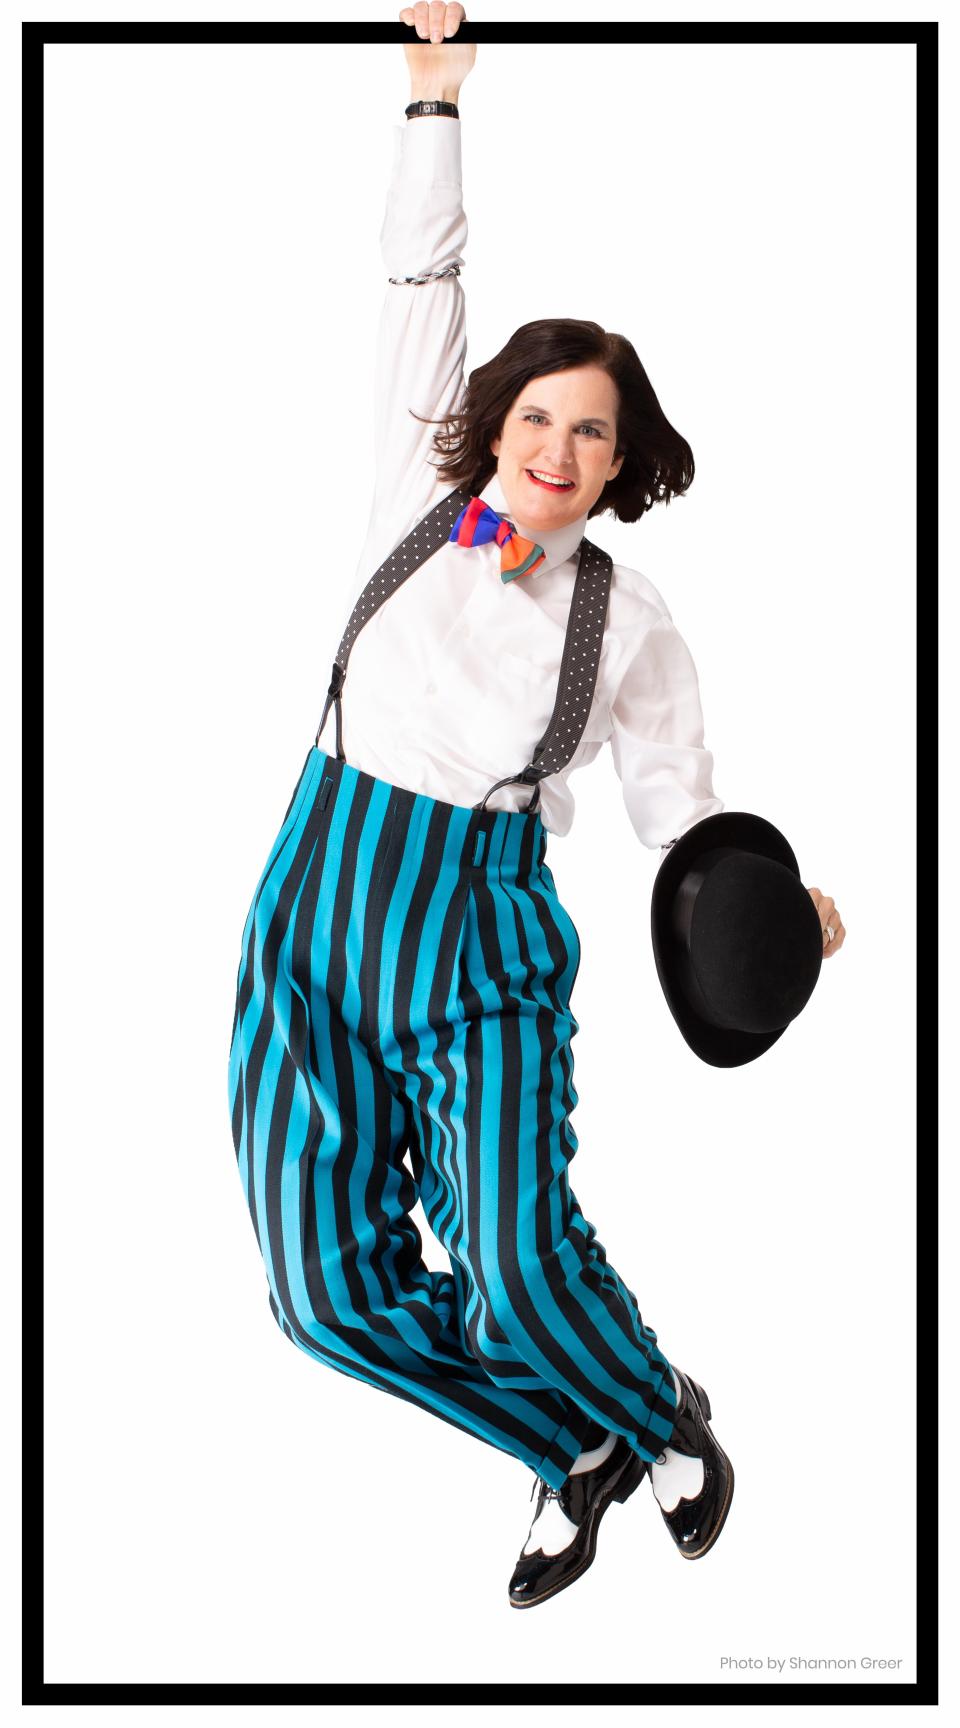 Paula Poundstone will be performing at Spartanburg Memorial Auditorium on March 29.